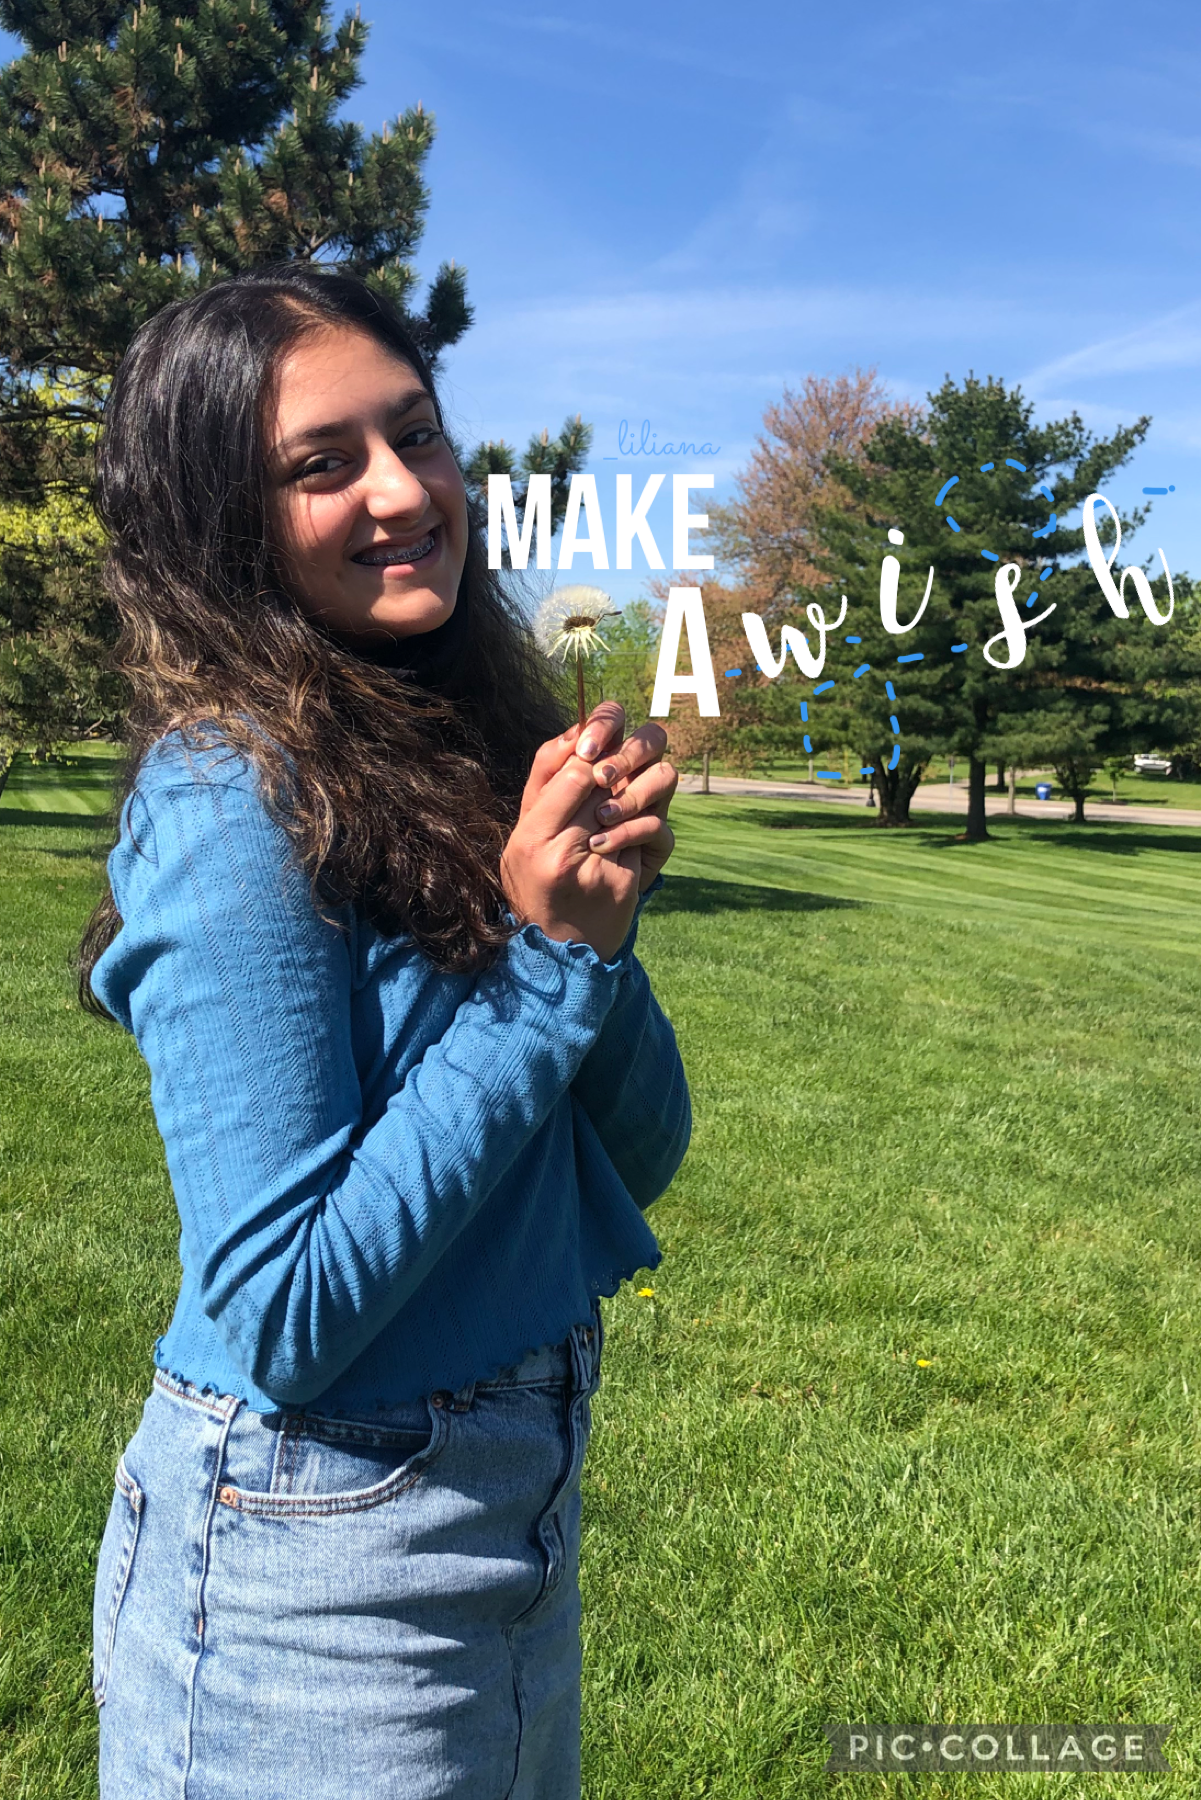 tap
part 3 of my no filter series! check the bio of my earlier post to learn more about it! 
yes this is basically what i do at school all day: pick dandelions 😂 no joke